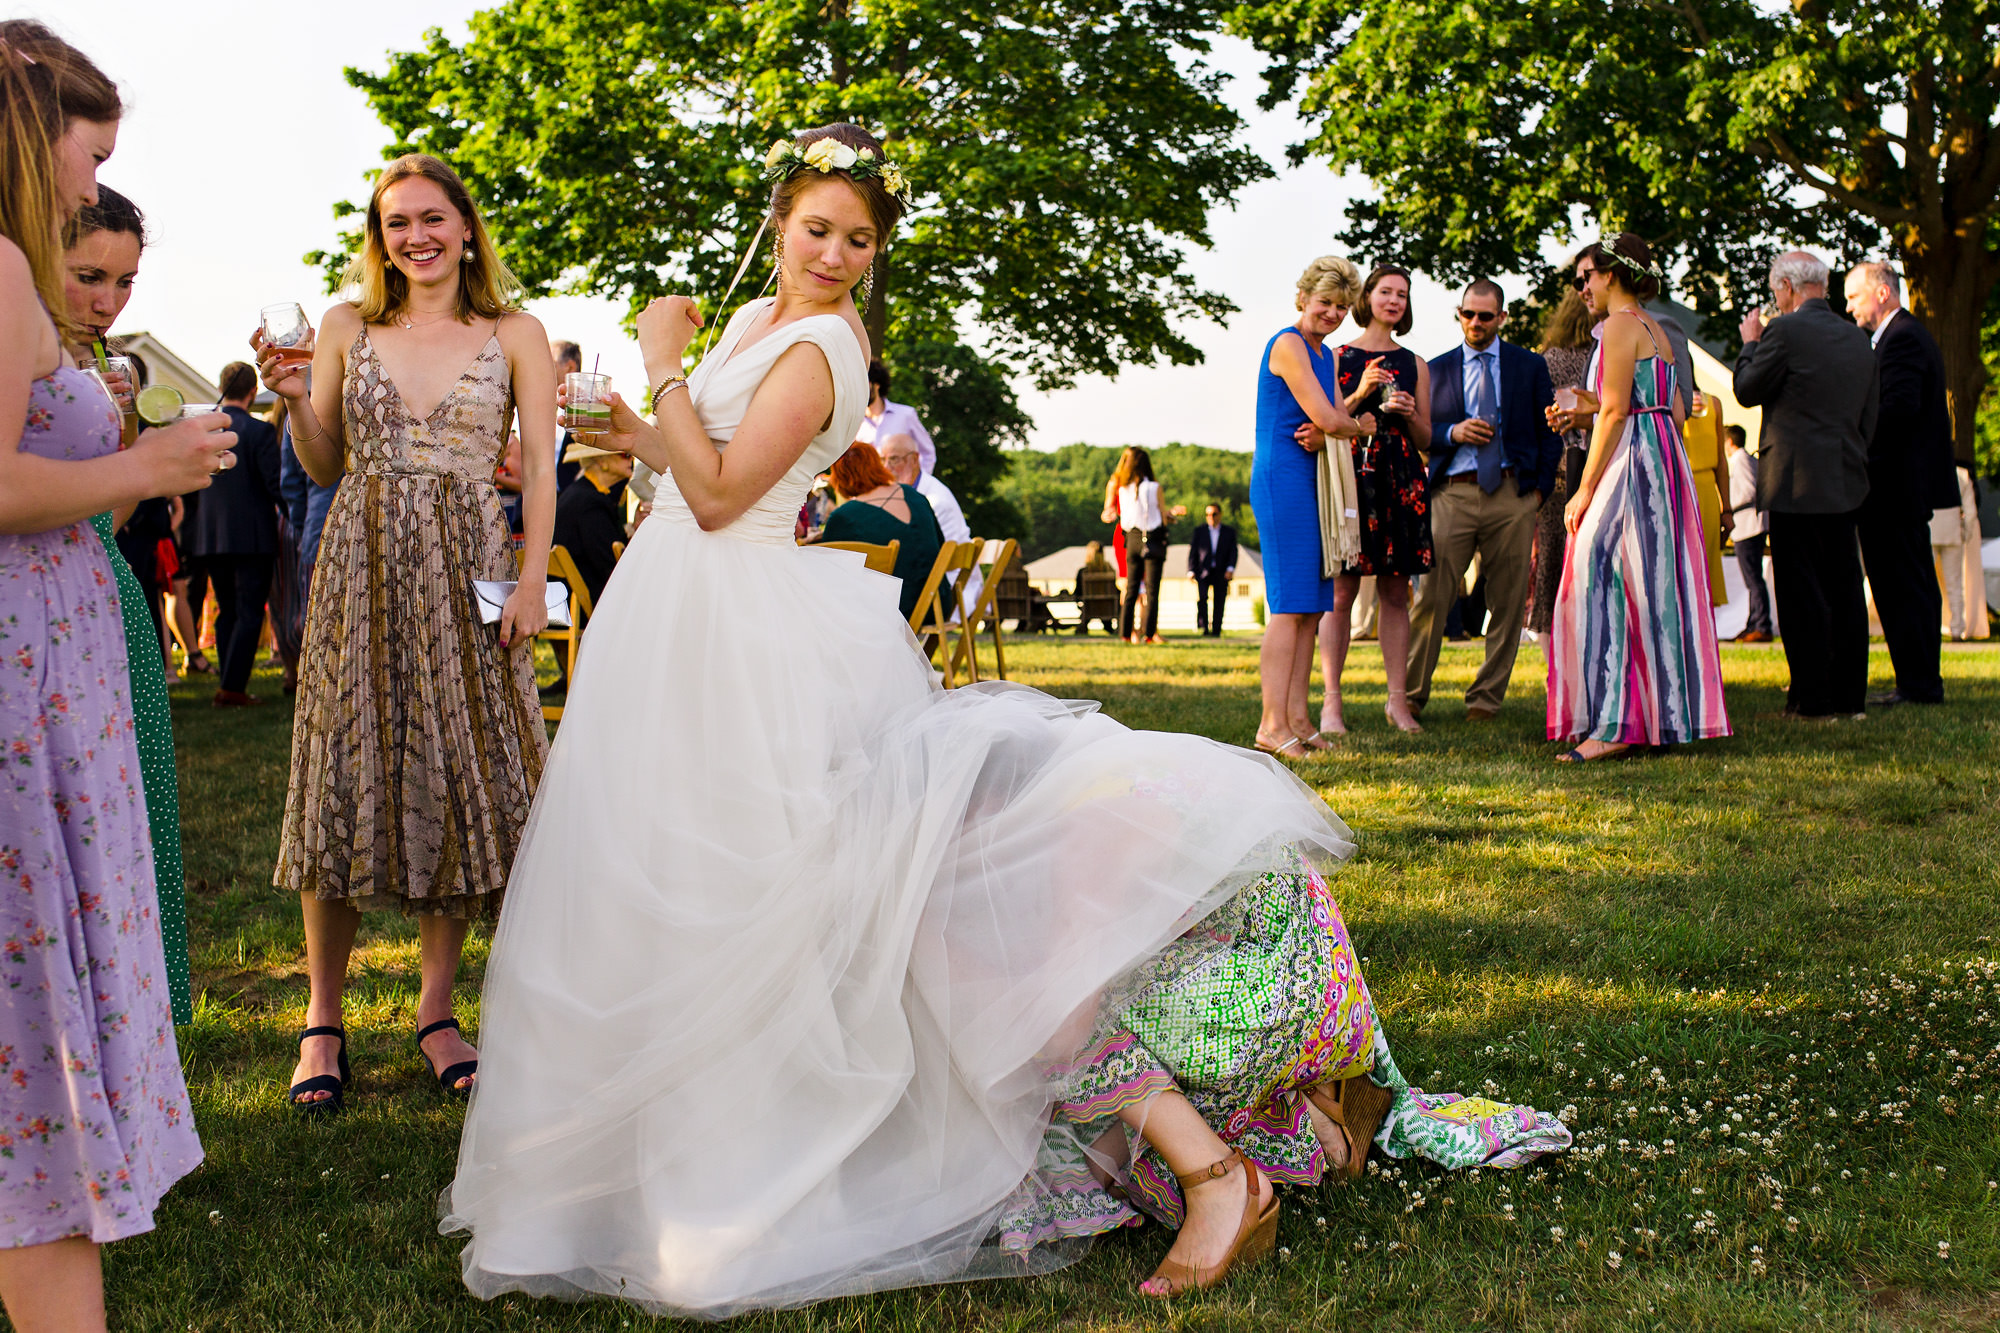 A friend attempts to help with the bride's dress in a comical moment at Laudholm Farm